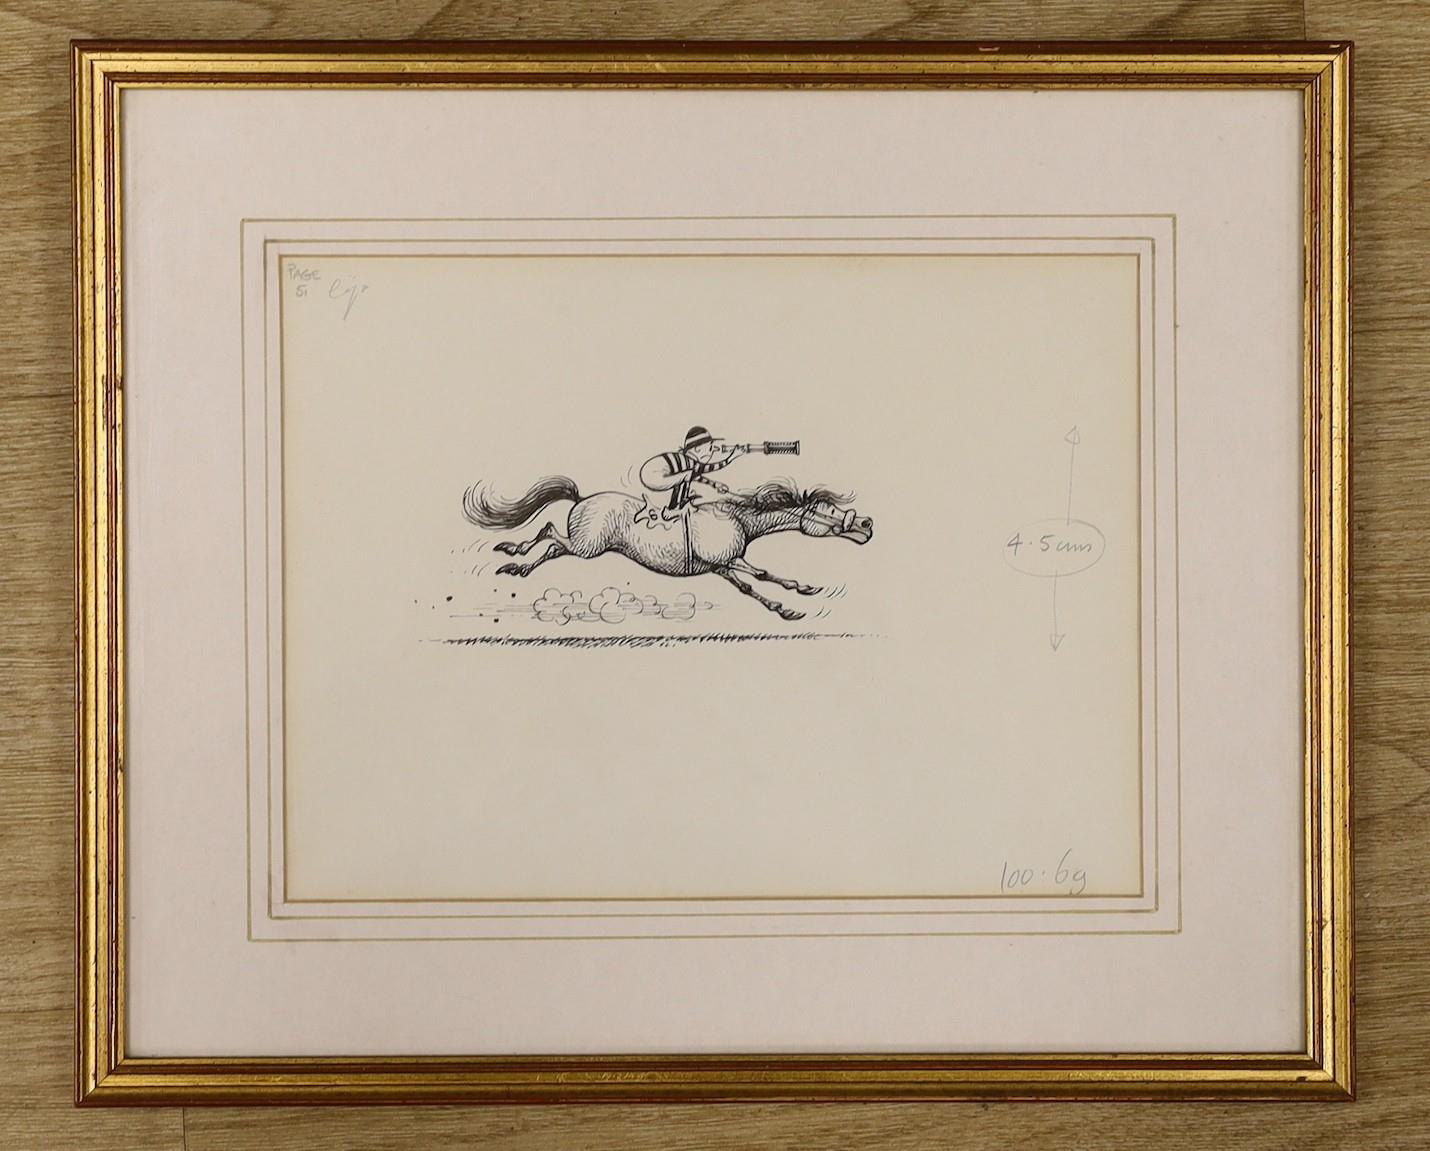 Norman Thelwell (1923-2004), original pen and ink illustration, 'Jockey fallen behind', annotated in - Image 2 of 4